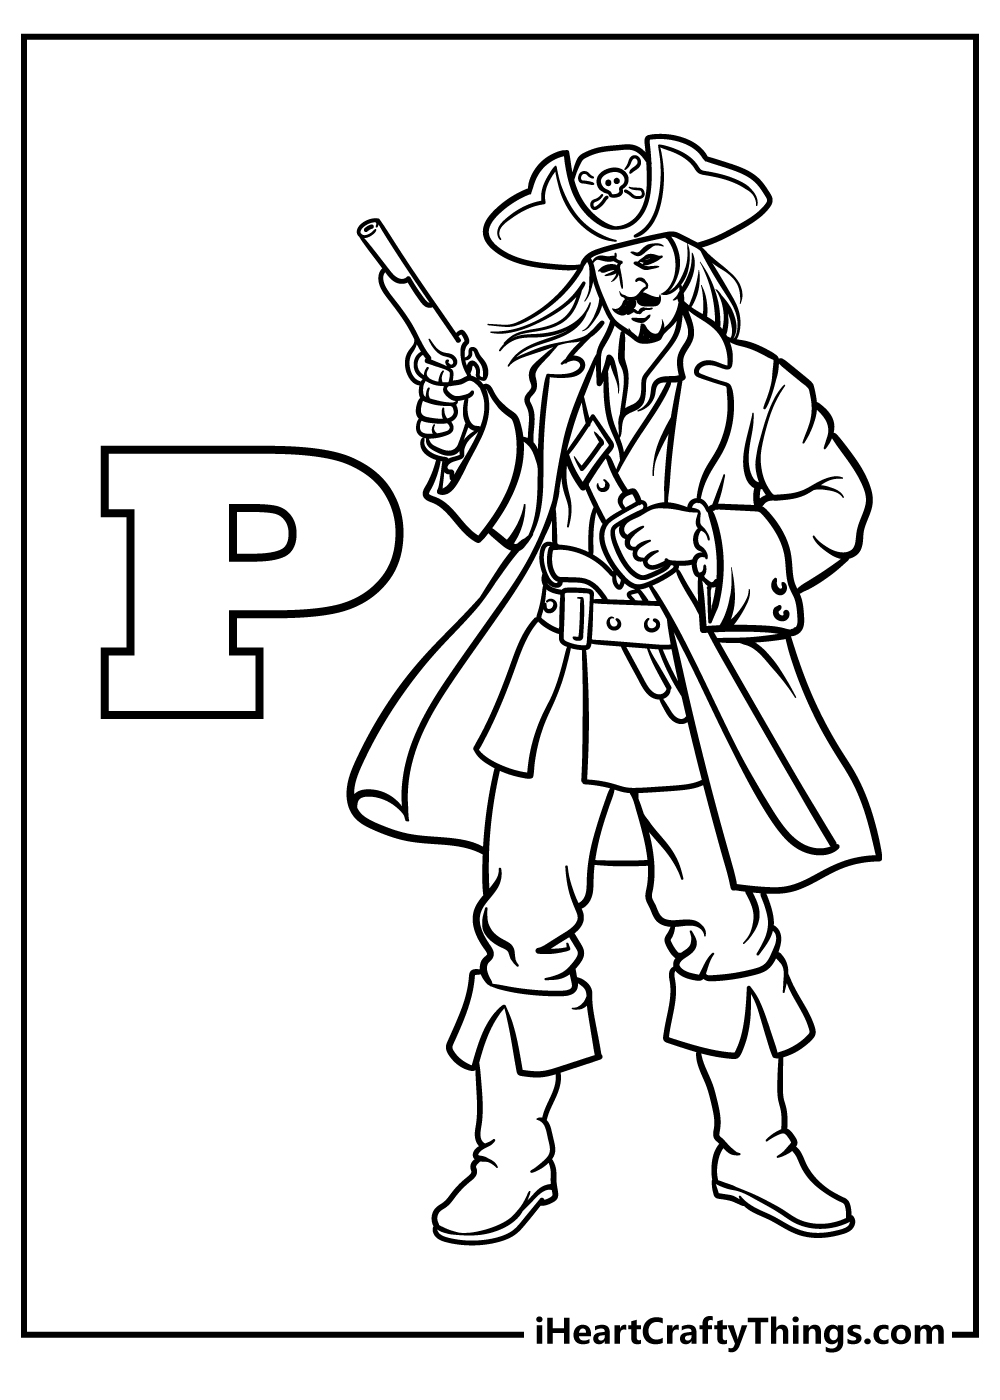 Letter p coloring pages free printables